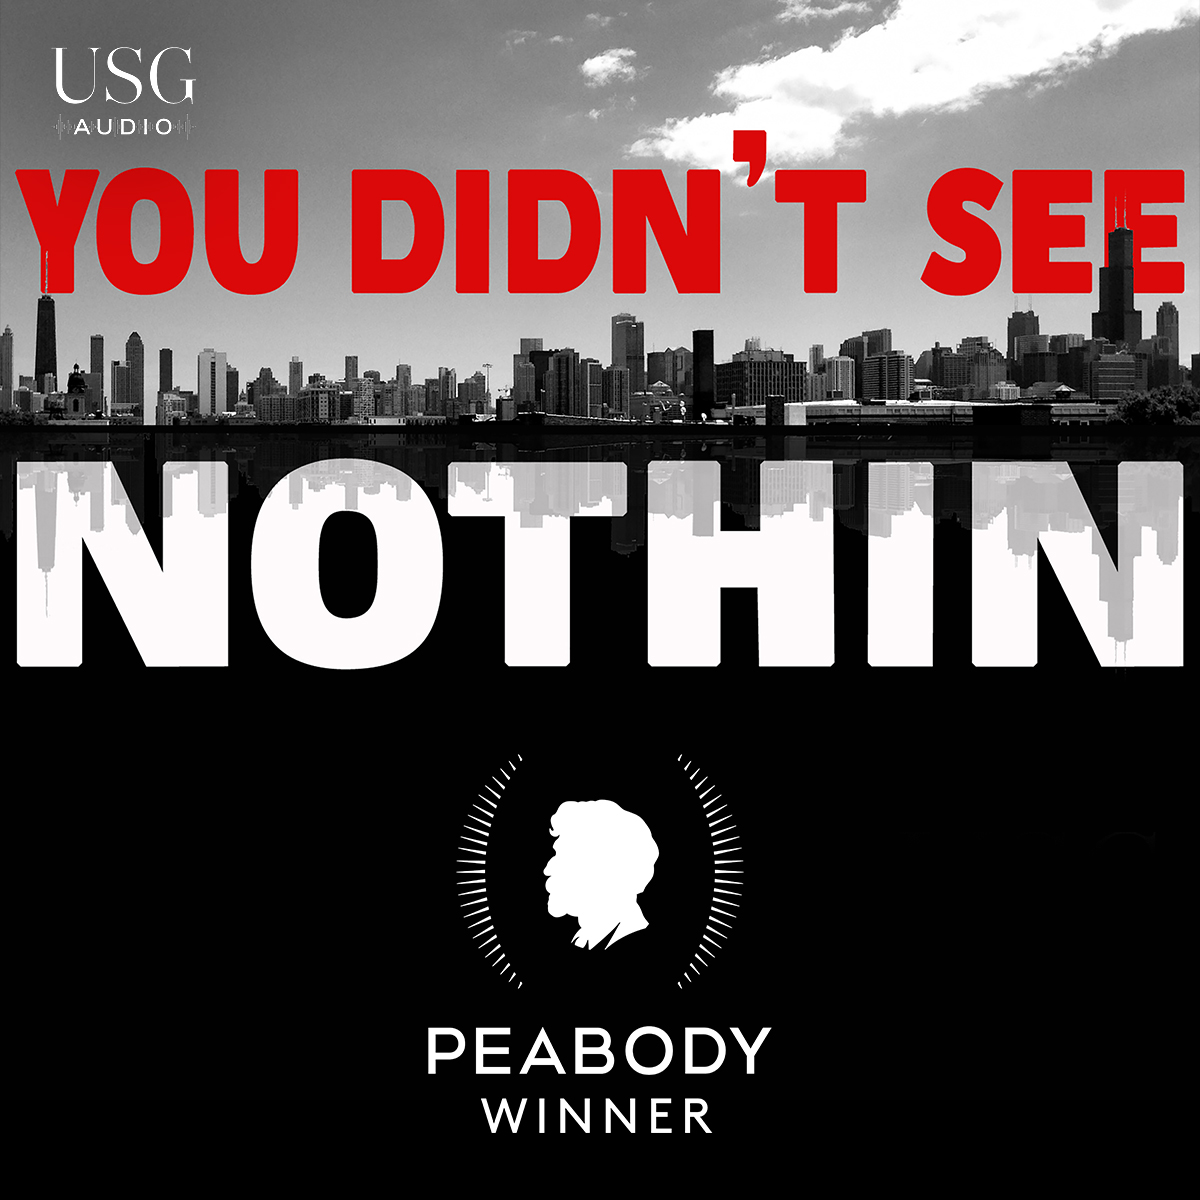 Congratulations to USG Audio and Invisible Institute’s You Didn’t See Nothin, on their win at this year’s Peabody Awards! The Peabody Awards honors the most powerful, enlightening, and invigorating stories in all of television, radio, and online media.